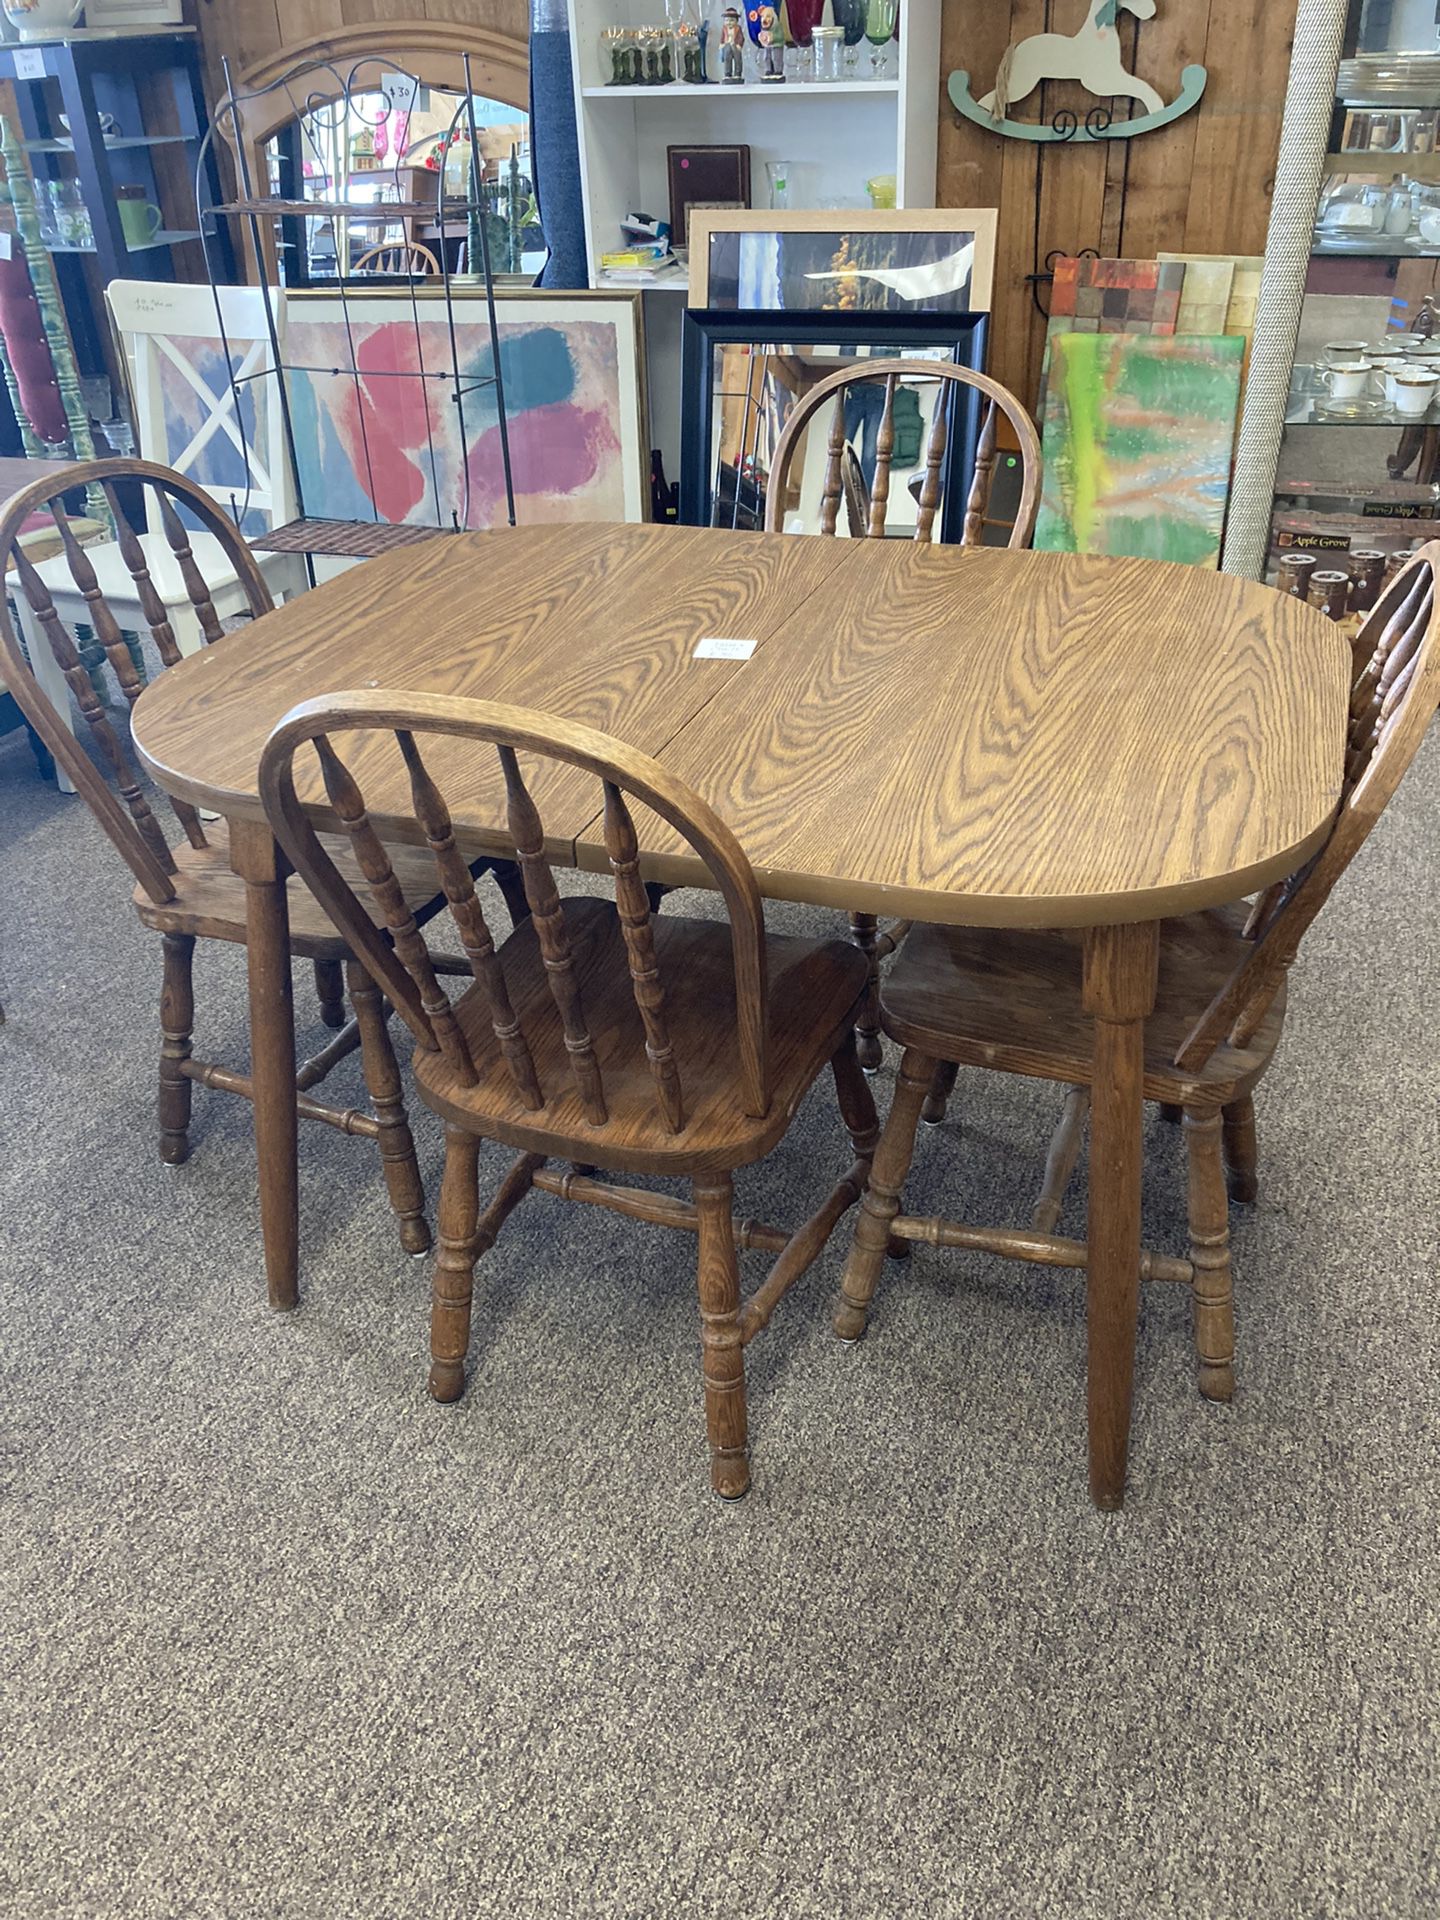 Table And 4 chairs 